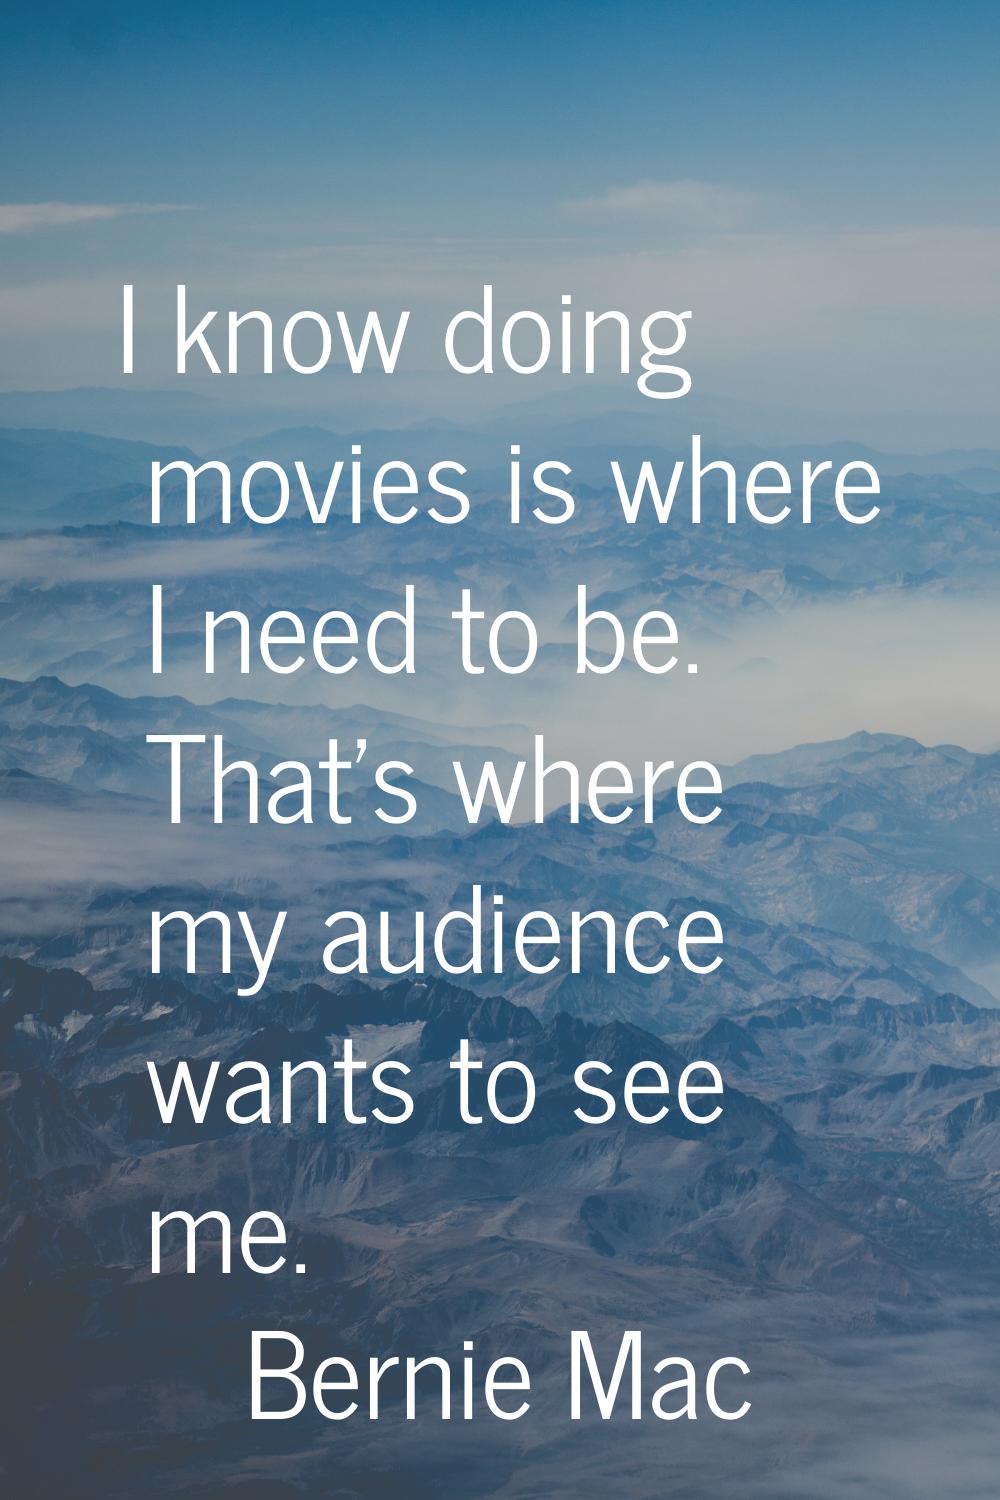 I know doing movies is where I need to be. That's where my audience wants to see me.